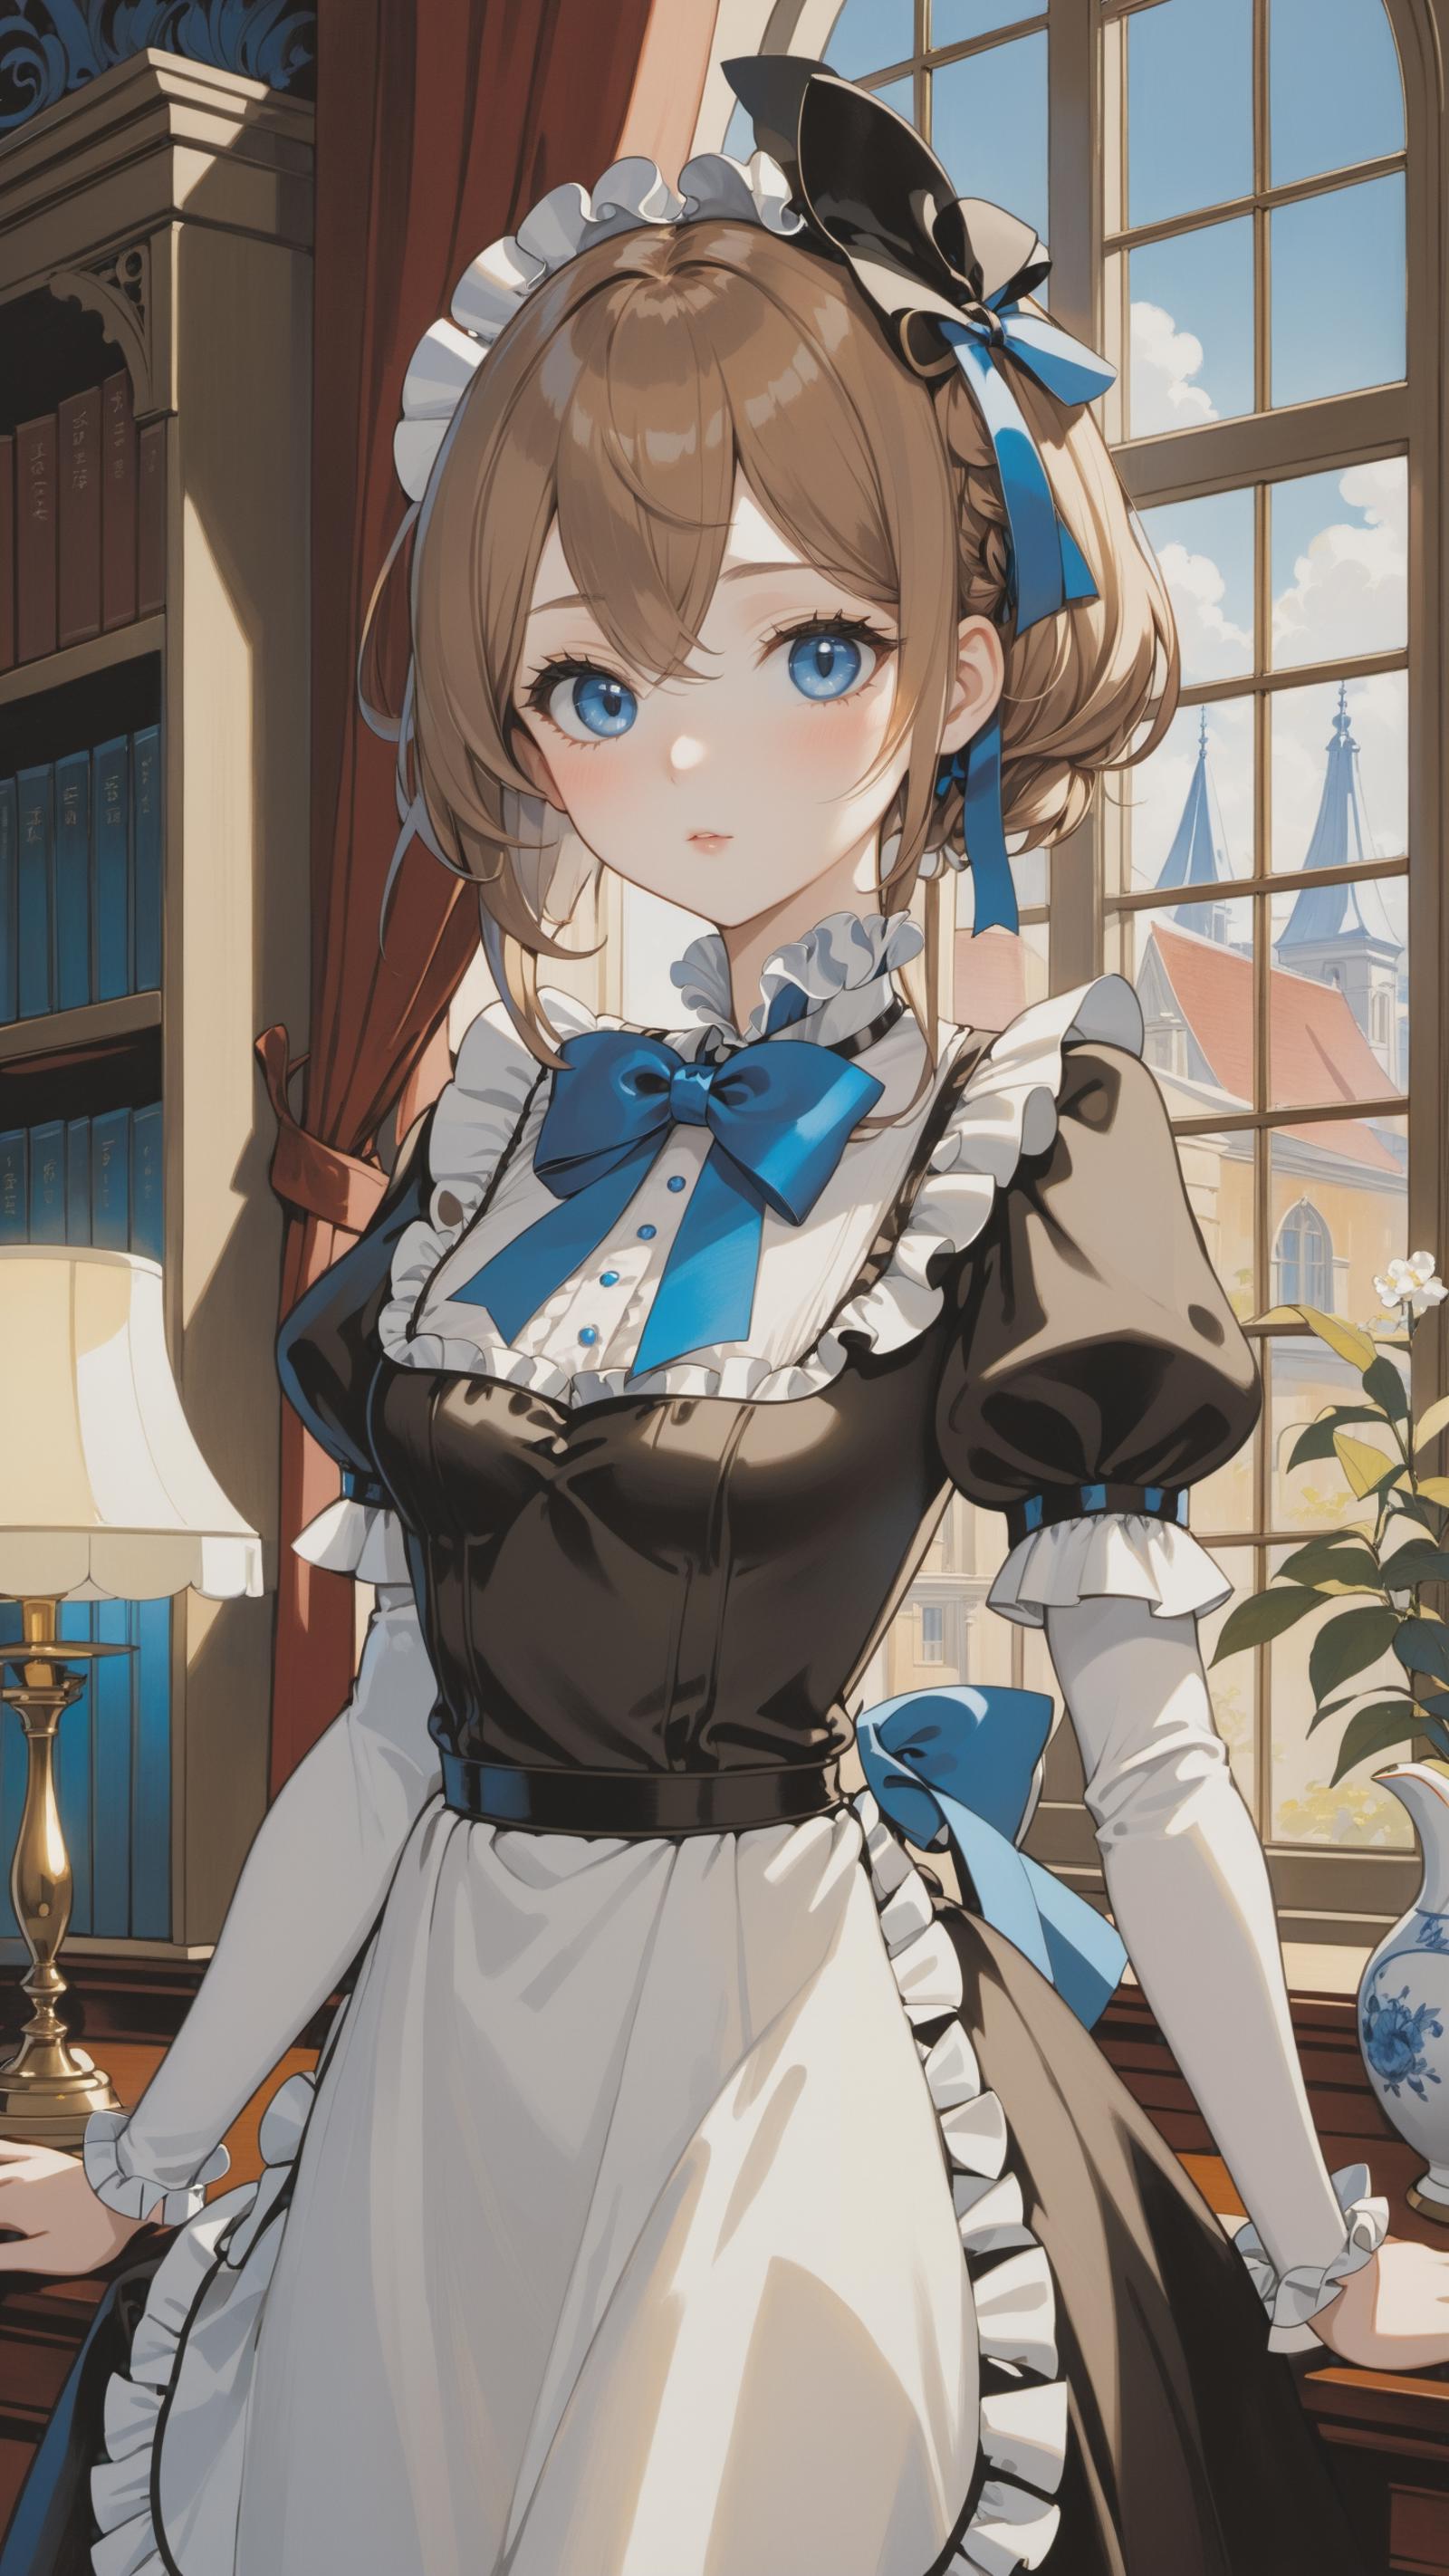 Anime character in a kitchen, wearing a maid's outfit and blue bow tie.